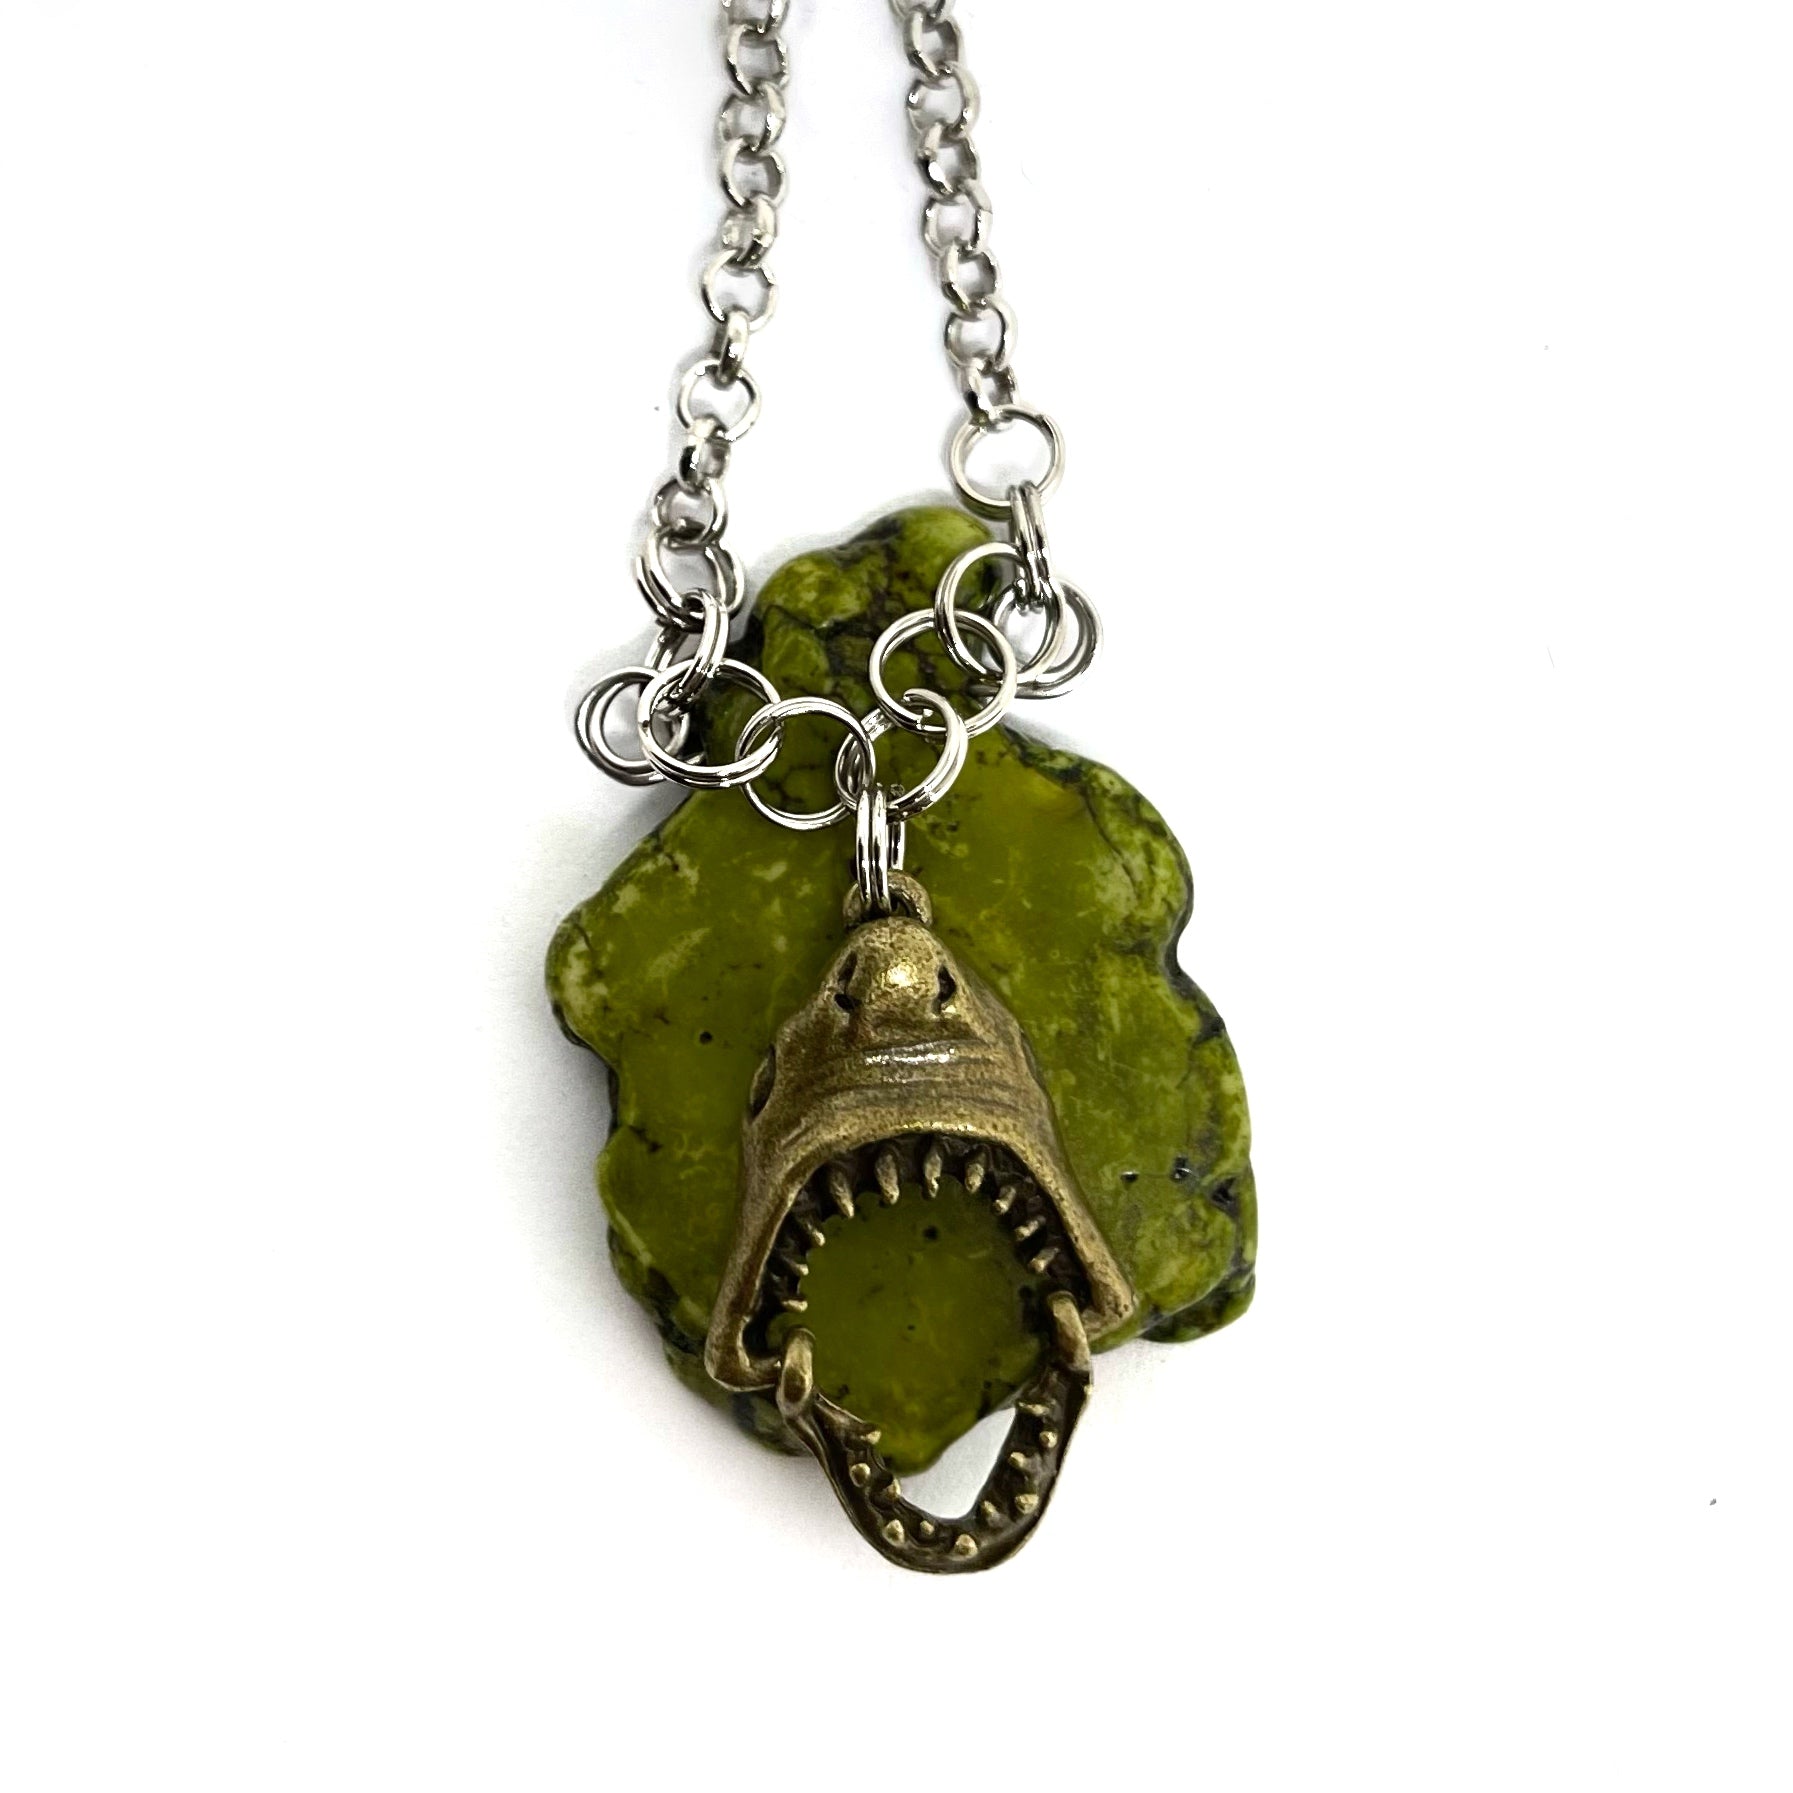 natural stone and shark pendant necklace ooak anthologie